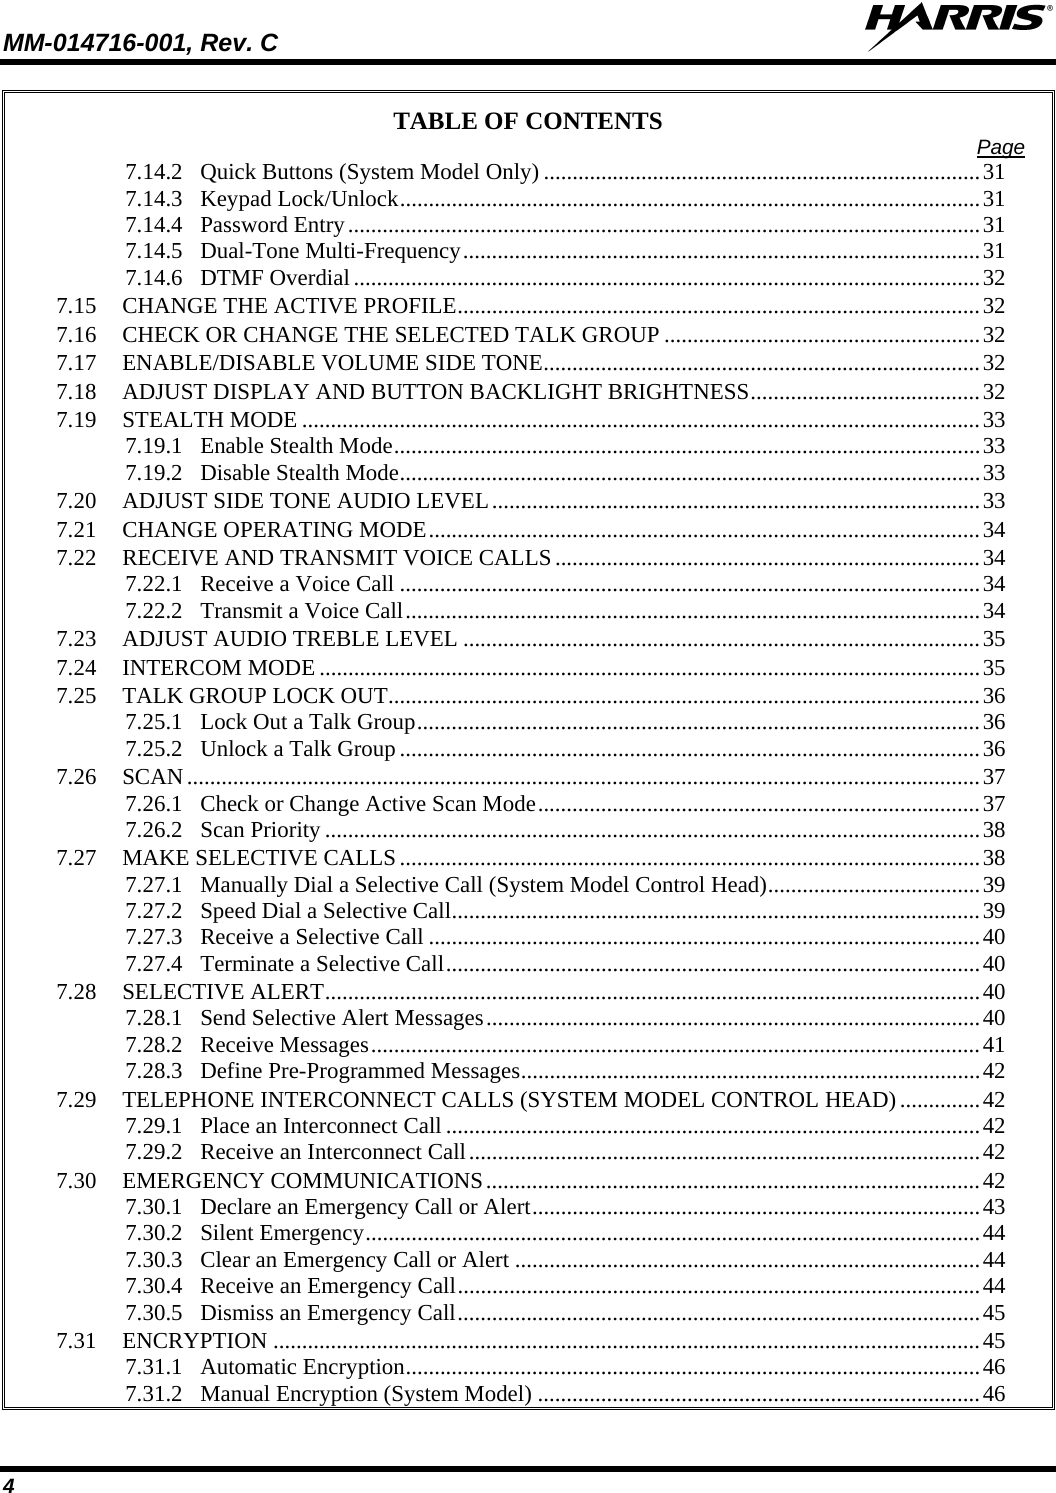 MM-014716-001, Rev. C  4 TABLE OF CONTENTS  Page 7.14.2 Quick Buttons (System Model Only) ............................................................................31 7.14.3 Keypad Lock/Unlock.....................................................................................................31 7.14.4 Password Entry..............................................................................................................31 7.14.5 Dual-Tone Multi-Frequency..........................................................................................31 7.14.6 DTMF Overdial .............................................................................................................32 7.15 CHANGE THE ACTIVE PROFILE...........................................................................................32 7.16 CHECK OR CHANGE THE SELECTED TALK GROUP .......................................................32 7.17 ENABLE/DISABLE VOLUME SIDE TONE............................................................................32 7.18 ADJUST DISPLAY AND BUTTON BACKLIGHT BRIGHTNESS........................................32 7.19 STEALTH MODE ......................................................................................................................33 7.19.1 Enable Stealth Mode......................................................................................................33 7.19.2 Disable Stealth Mode.....................................................................................................33 7.20 ADJUST SIDE TONE AUDIO LEVEL.....................................................................................33 7.21 CHANGE OPERATING MODE................................................................................................34 7.22 RECEIVE AND TRANSMIT VOICE CALLS ..........................................................................34 7.22.1 Receive a Voice Call .....................................................................................................34 7.22.2 Transmit a Voice Call....................................................................................................34 7.23 ADJUST AUDIO TREBLE LEVEL ..........................................................................................35 7.24 INTERCOM MODE ...................................................................................................................35 7.25 TALK GROUP LOCK OUT.......................................................................................................36 7.25.1 Lock Out a Talk Group..................................................................................................36 7.25.2 Unlock a Talk Group .....................................................................................................36 7.26 SCAN ..........................................................................................................................................37 7.26.1 Check or Change Active Scan Mode.............................................................................37 7.26.2 Scan Priority ..................................................................................................................38 7.27 MAKE SELECTIVE CALLS .....................................................................................................38 7.27.1 Manually Dial a Selective Call (System Model Control Head).....................................39 7.27.2 Speed Dial a Selective Call............................................................................................39 7.27.3 Receive a Selective Call ................................................................................................40 7.27.4 Terminate a Selective Call.............................................................................................40 7.28 SELECTIVE ALERT..................................................................................................................40 7.28.1 Send Selective Alert Messages......................................................................................40 7.28.2 Receive Messages..........................................................................................................41 7.28.3 Define Pre-Programmed Messages................................................................................42 7.29 TELEPHONE INTERCONNECT CALLS (SYSTEM MODEL CONTROL HEAD) ..............42 7.29.1 Place an Interconnect Call .............................................................................................42 7.29.2 Receive an Interconnect Call.........................................................................................42 7.30 EMERGENCY COMMUNICATIONS......................................................................................42 7.30.1 Declare an Emergency Call or Alert..............................................................................43 7.30.2 Silent Emergency...........................................................................................................44 7.30.3 Clear an Emergency Call or Alert .................................................................................44 7.30.4 Receive an Emergency Call...........................................................................................44 7.30.5 Dismiss an Emergency Call...........................................................................................45 7.31 ENCRYPTION ...........................................................................................................................45 7.31.1 Automatic Encryption....................................................................................................46 7.31.2 Manual Encryption (System Model) .............................................................................46 